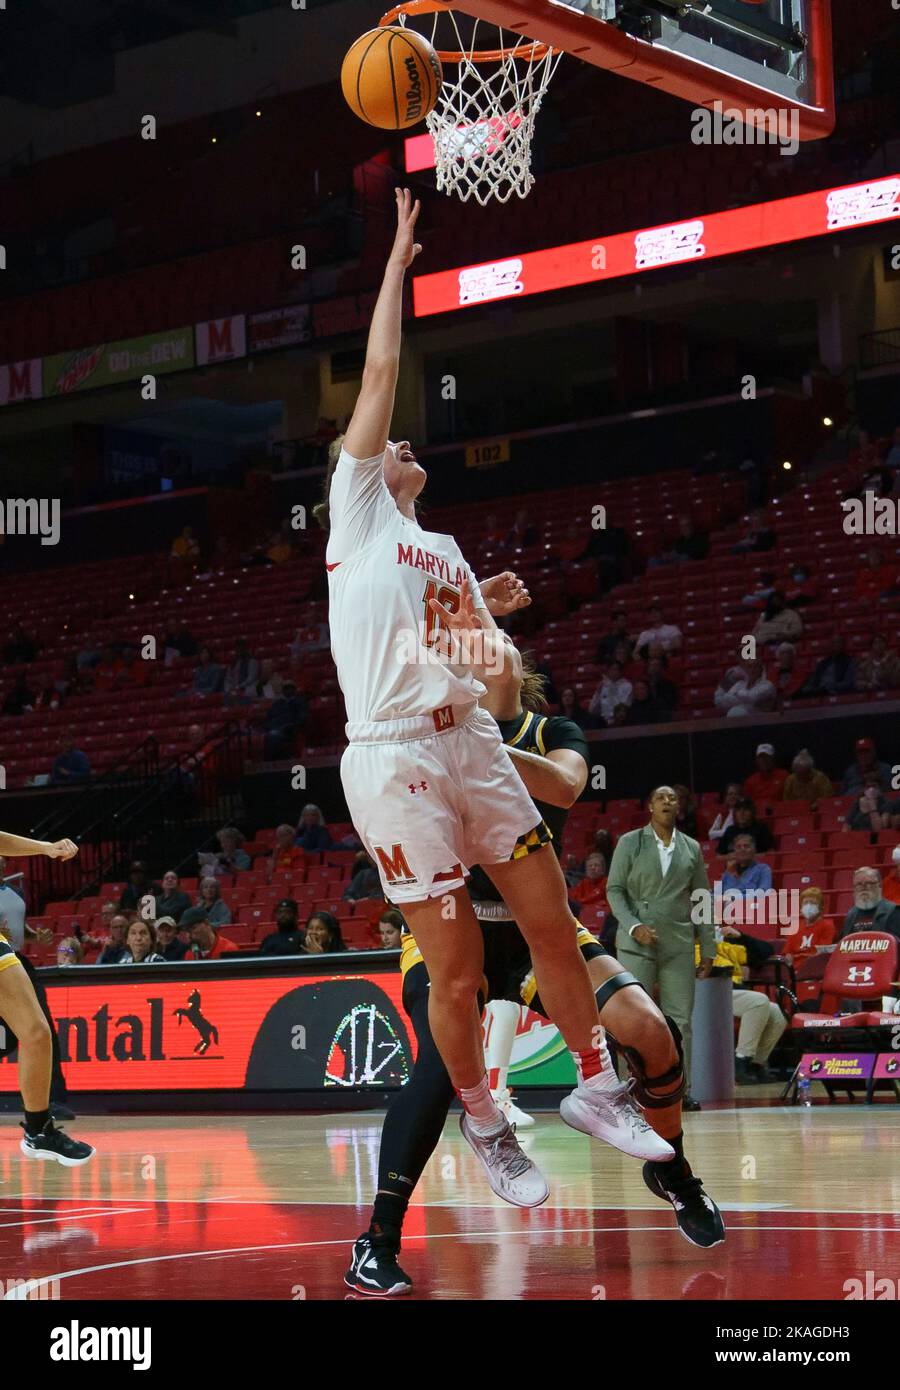 COLLEGE PARK, MD., USA - 02 NOVEMBER 2022: Maryland Terrapins guard Elisa Pinzan (12) lobs in a shot during a women's college basketball game between the Maryland Terrapins and the Millersville Marauders on November 02 2022, at Xfinity Center, in College Park, Maryland (Photo by Tony Quinn-Alamy Live News) Stock Photo